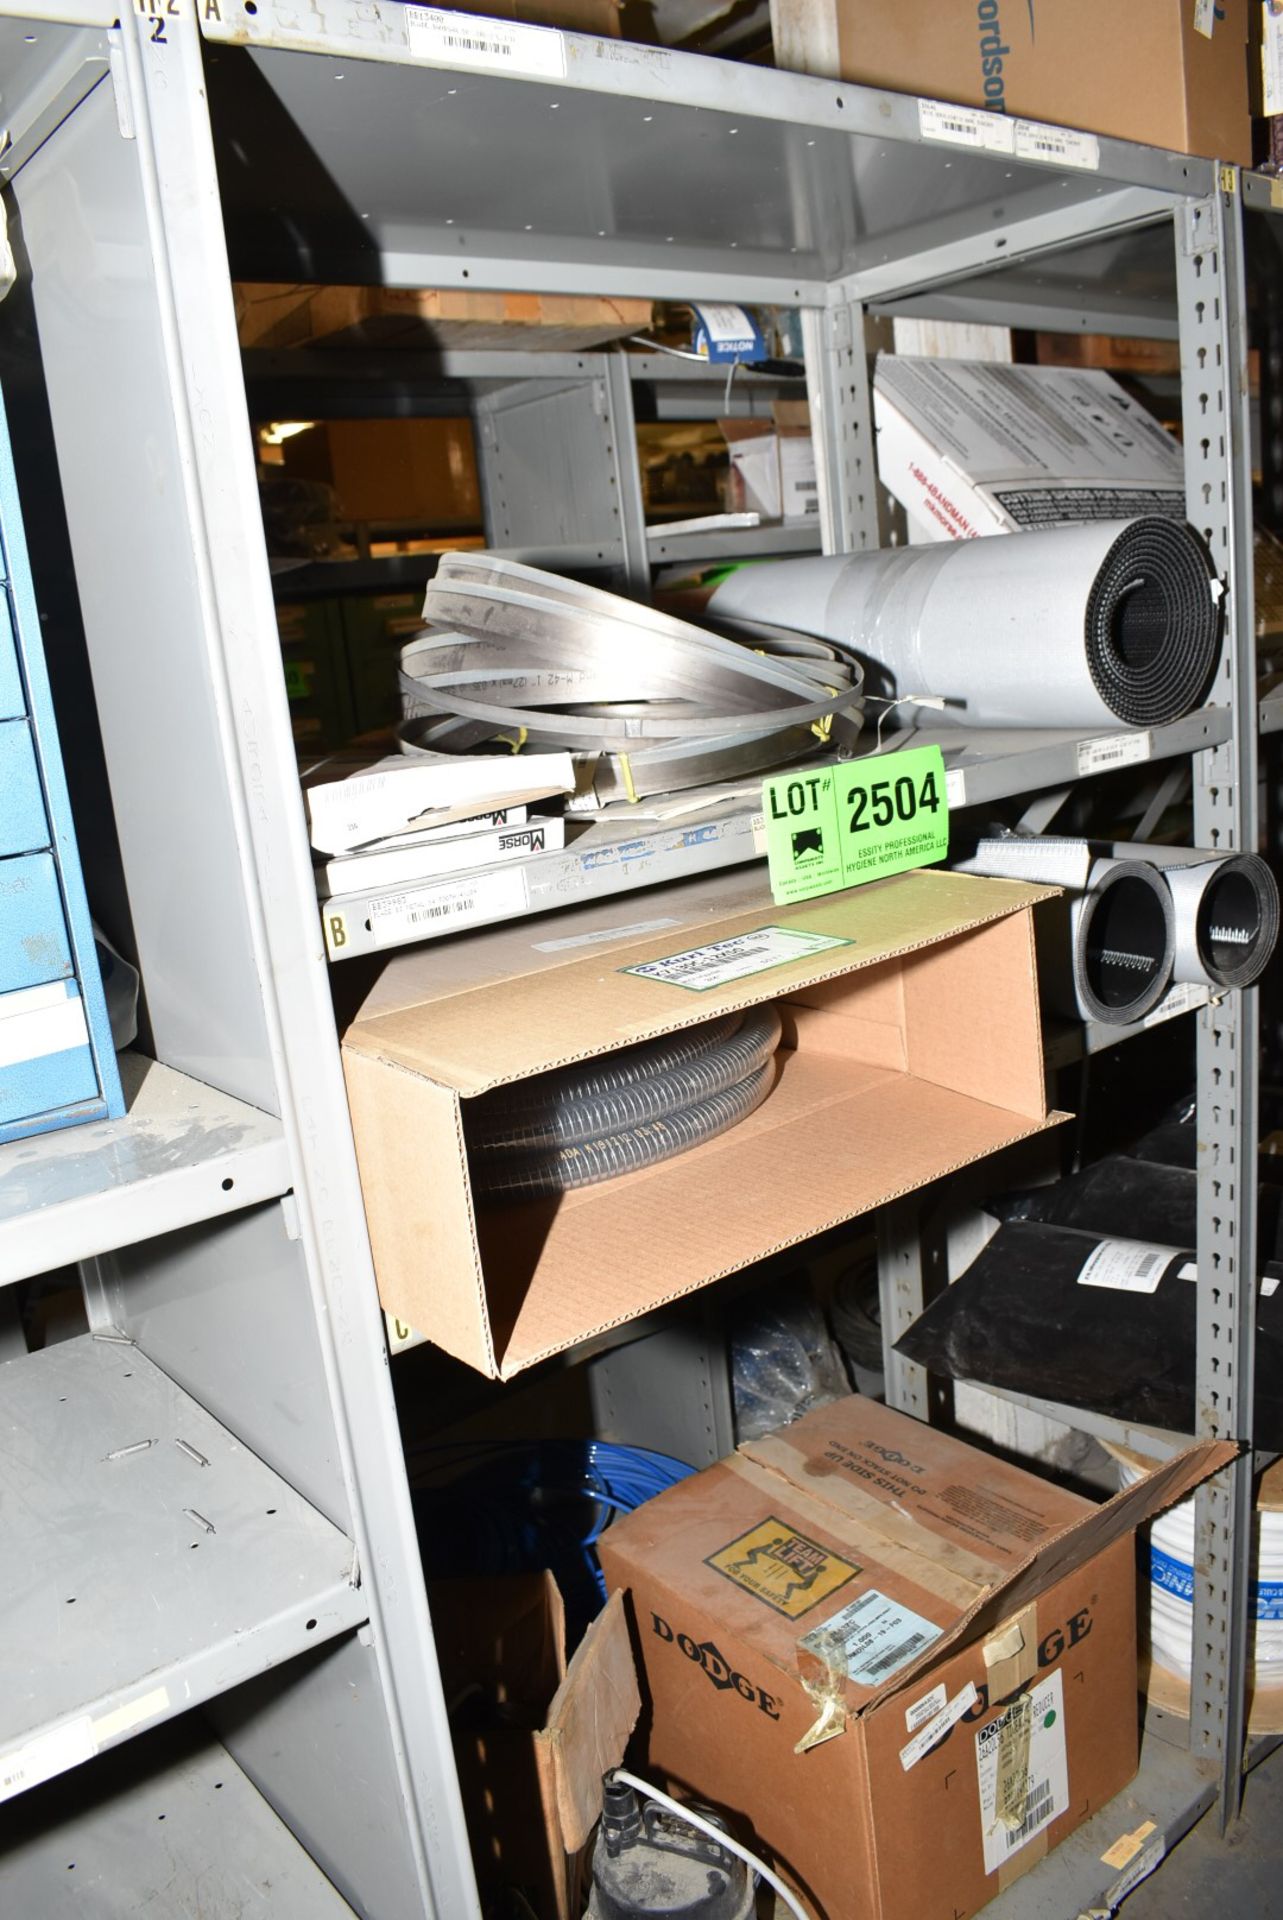 LOT/ CONTENTS OF SHELF - INCLUDING BAND SAW BLADES, CONVEYOR BELTING, POLYWIRE HOSE, SUMP PUMPS [